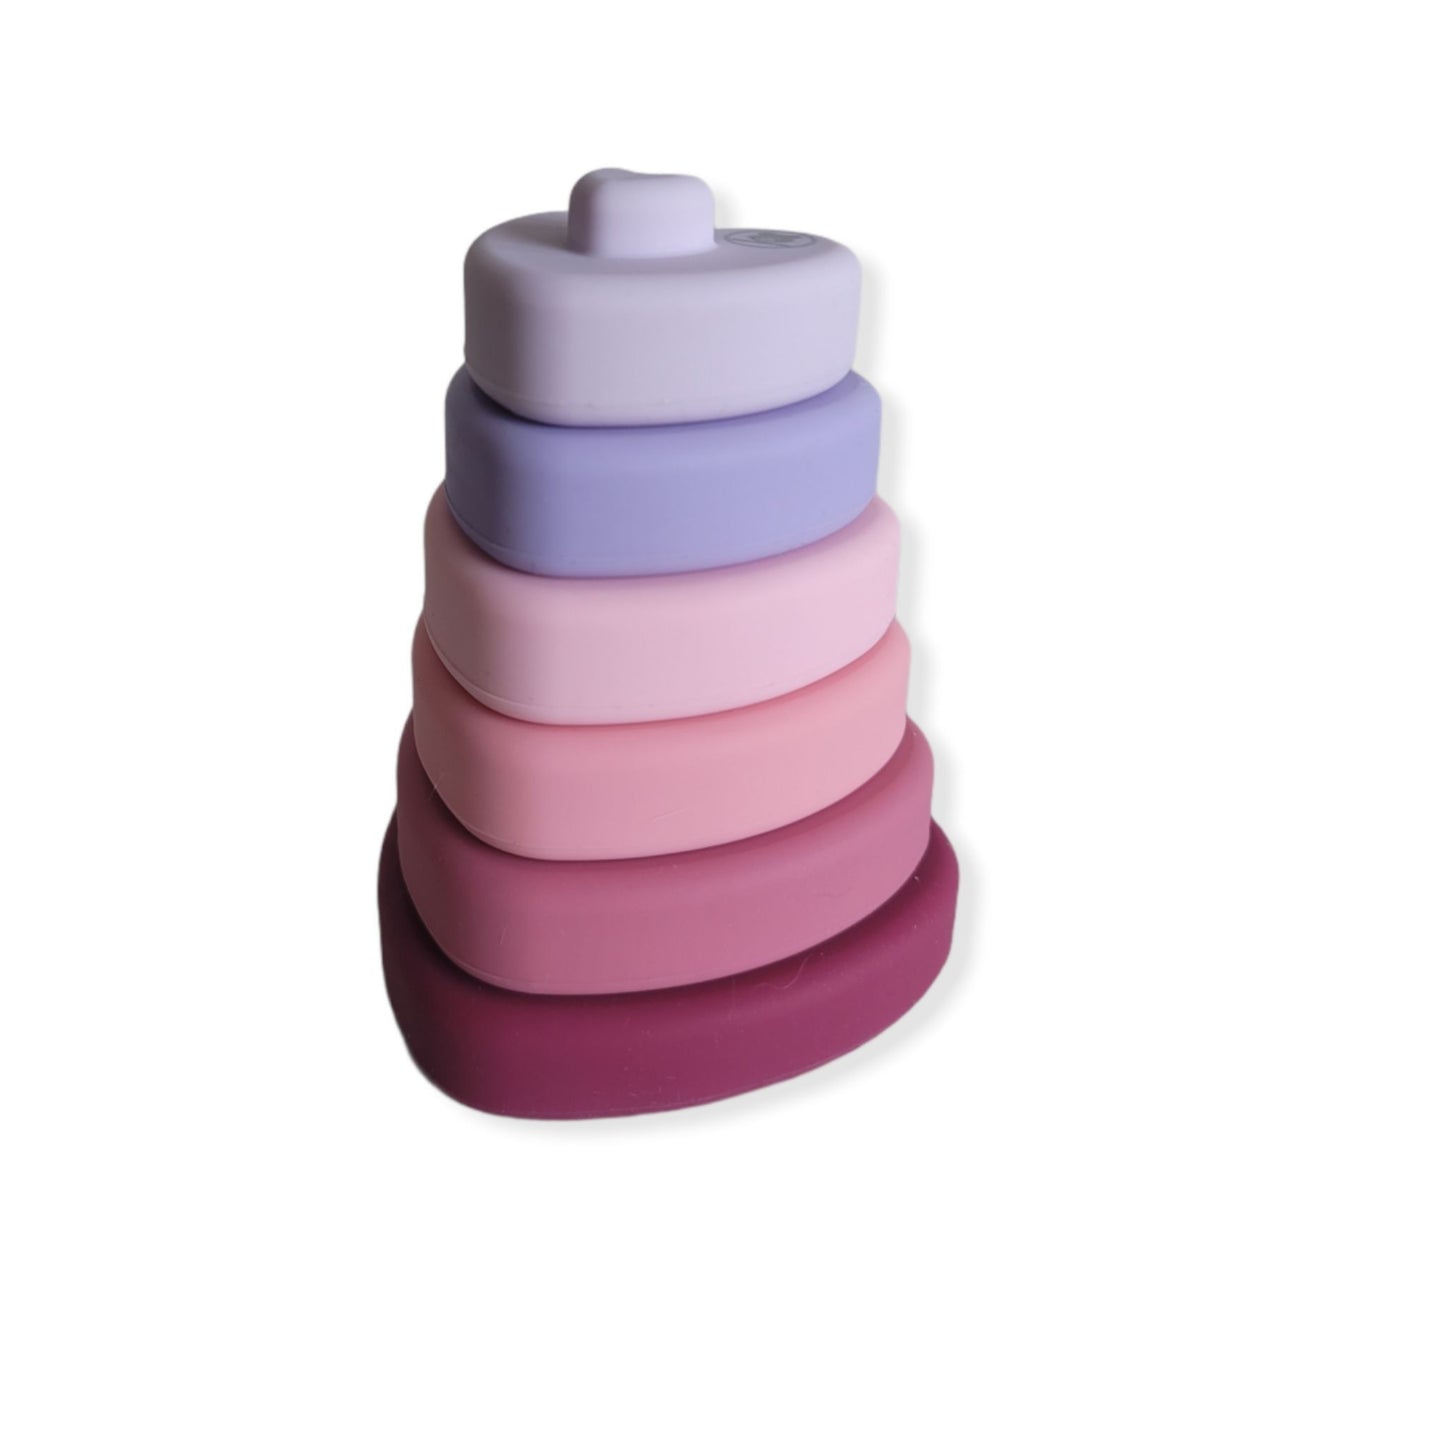 Stacking and nesting toy in shpae of a heart stacked - hunny bubba kids